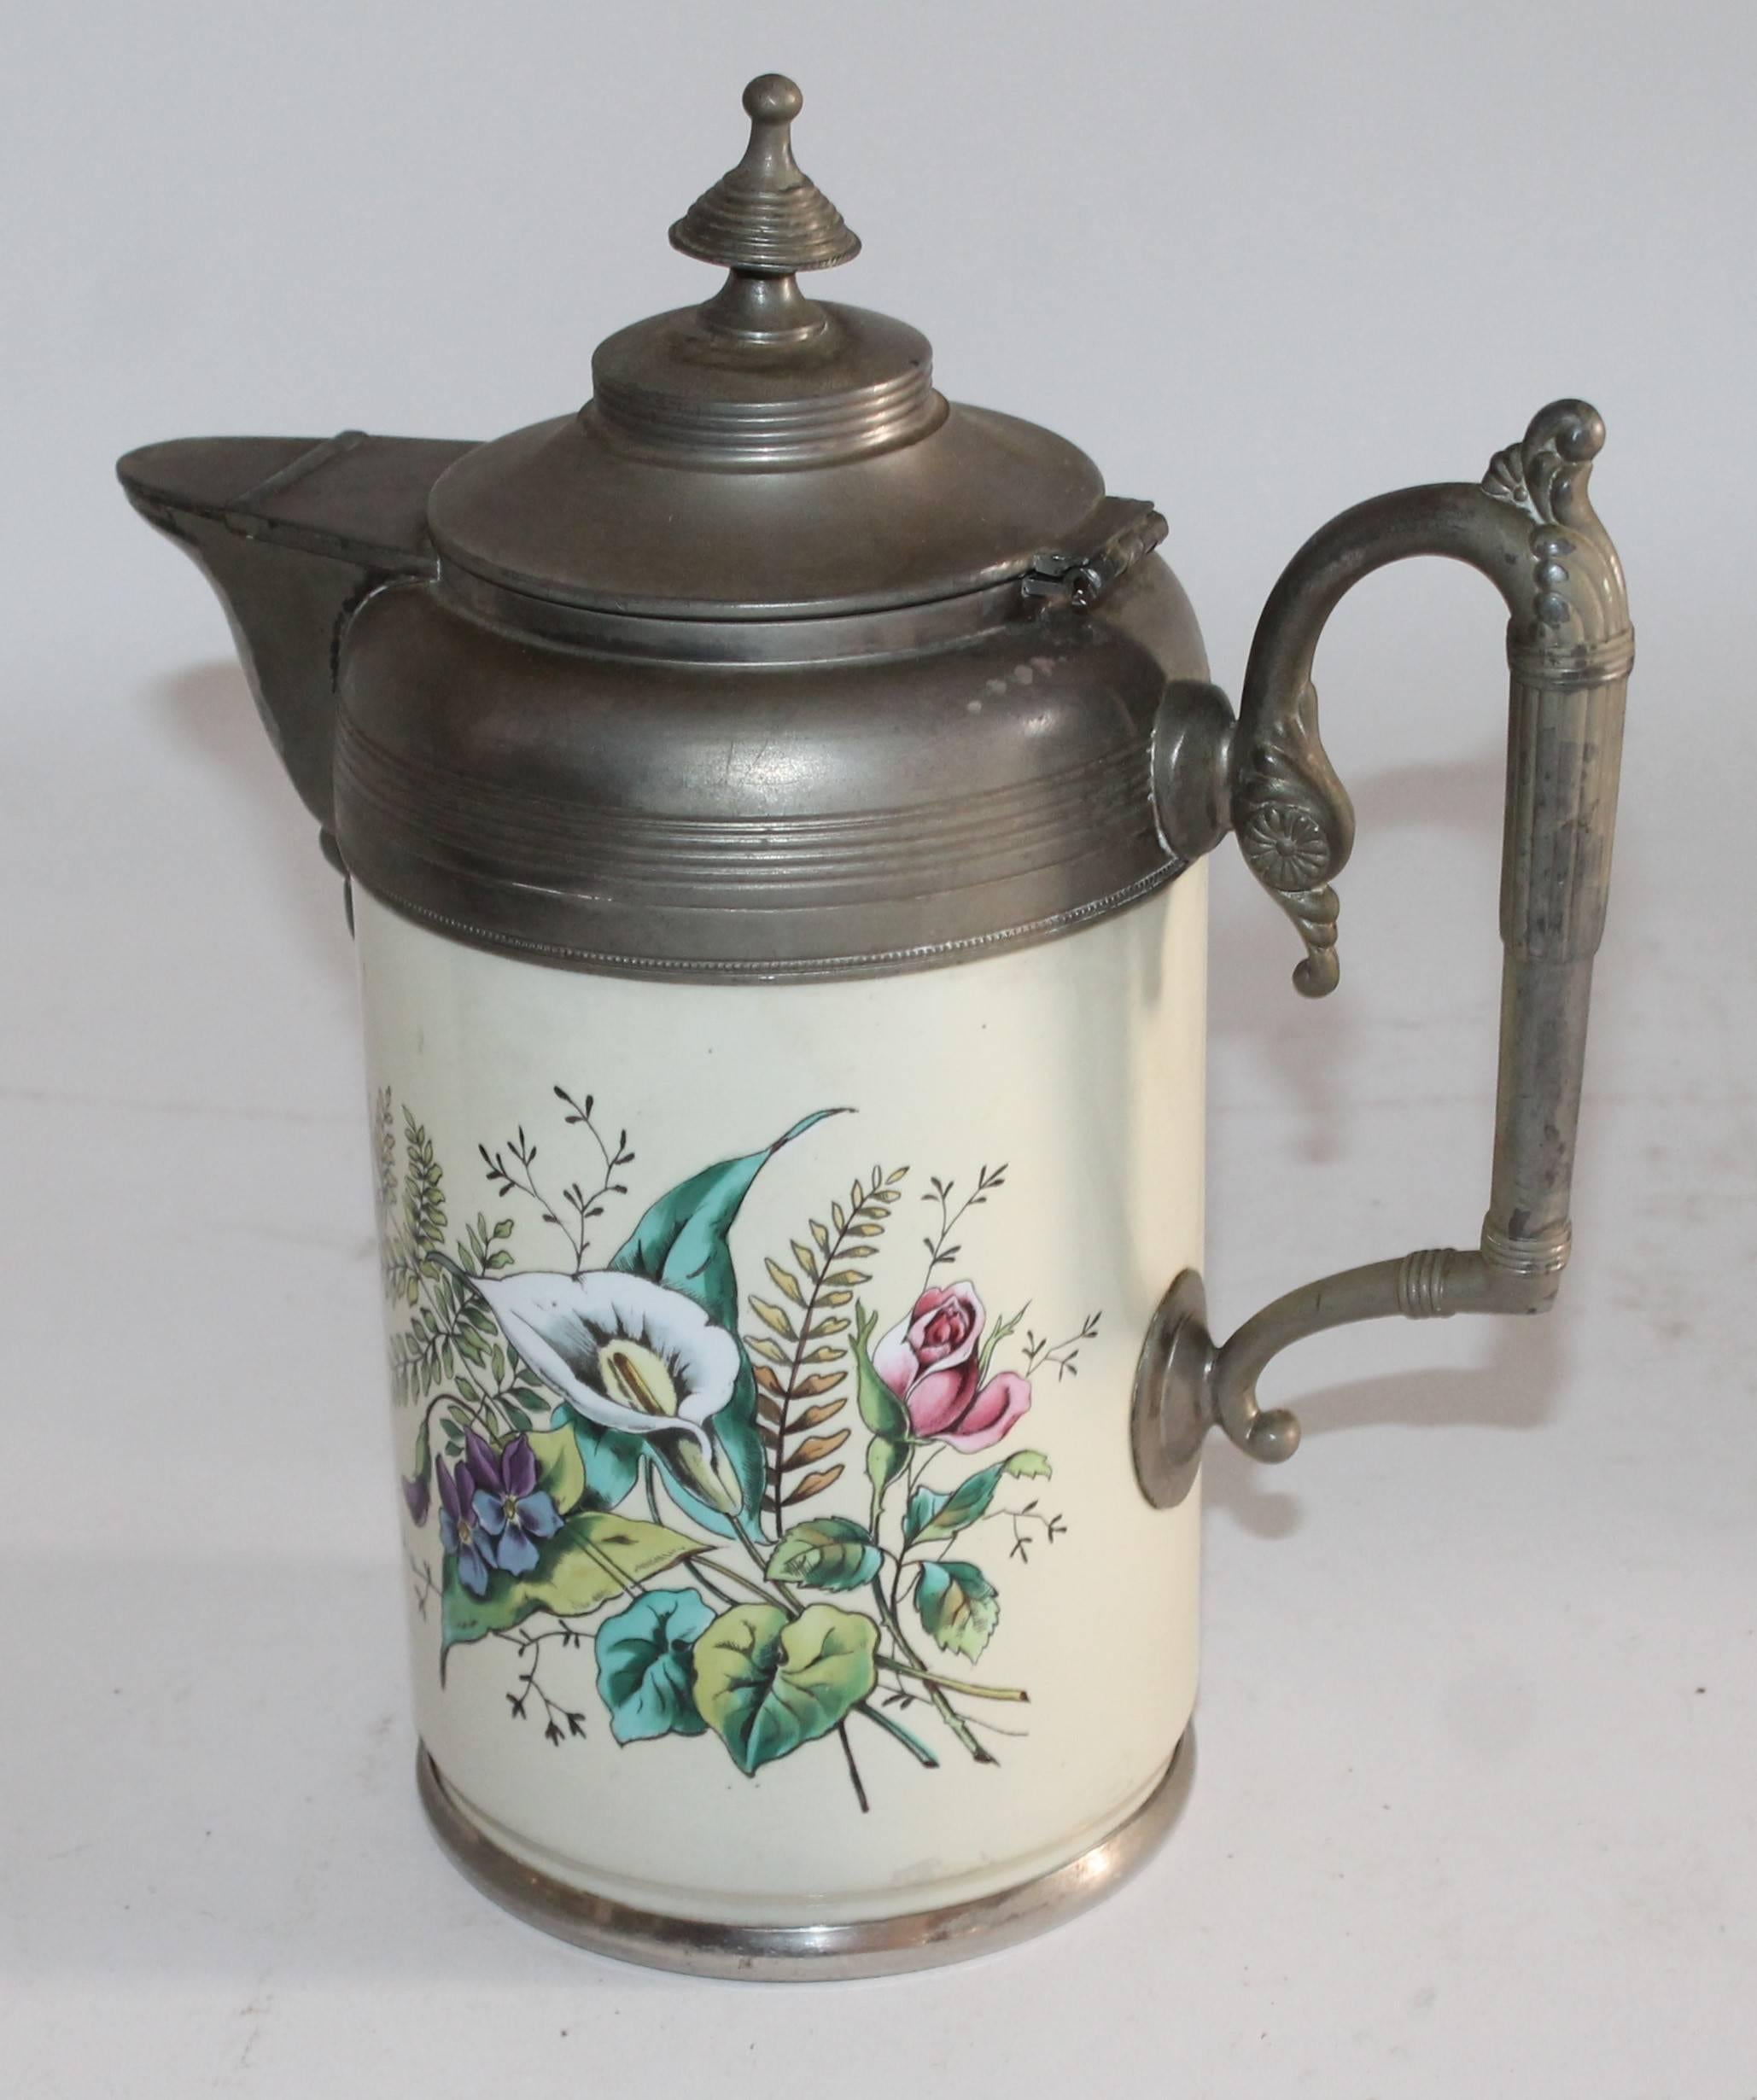 This very rare hand-painted and decorated pewter coffee pot is in amazing as found condition.